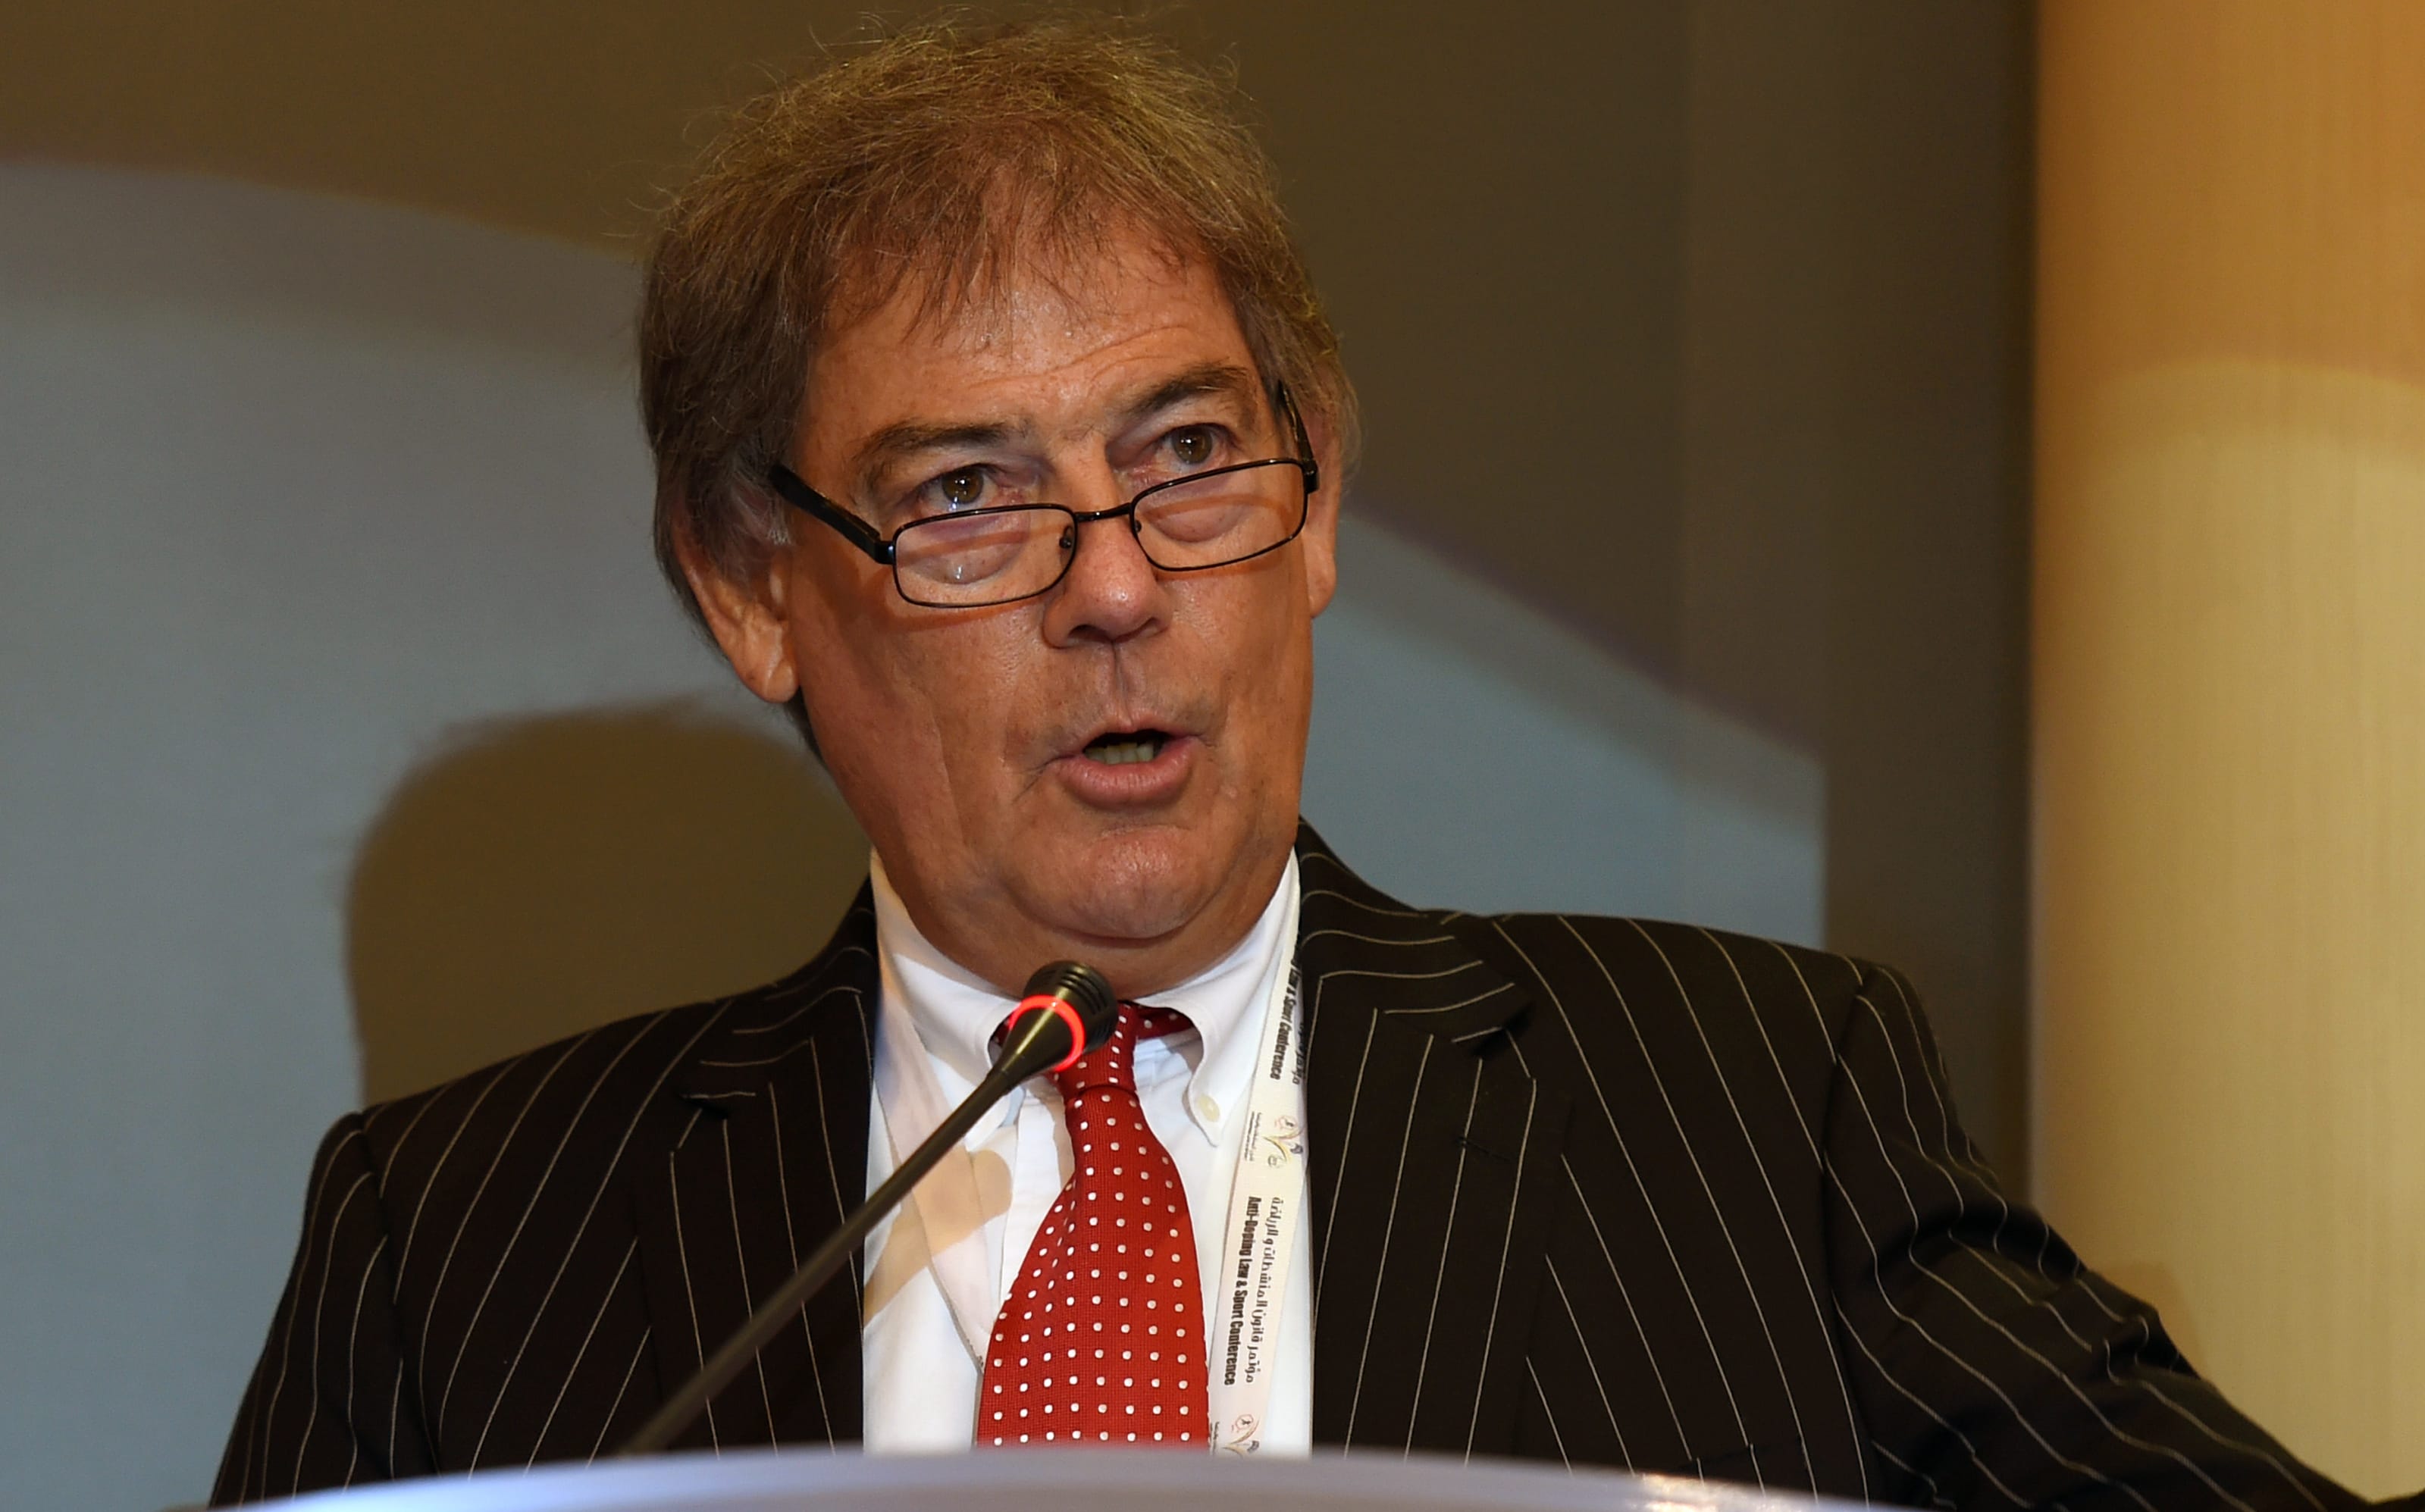 Director-General of the World Anti-Doping Agency, David Howman